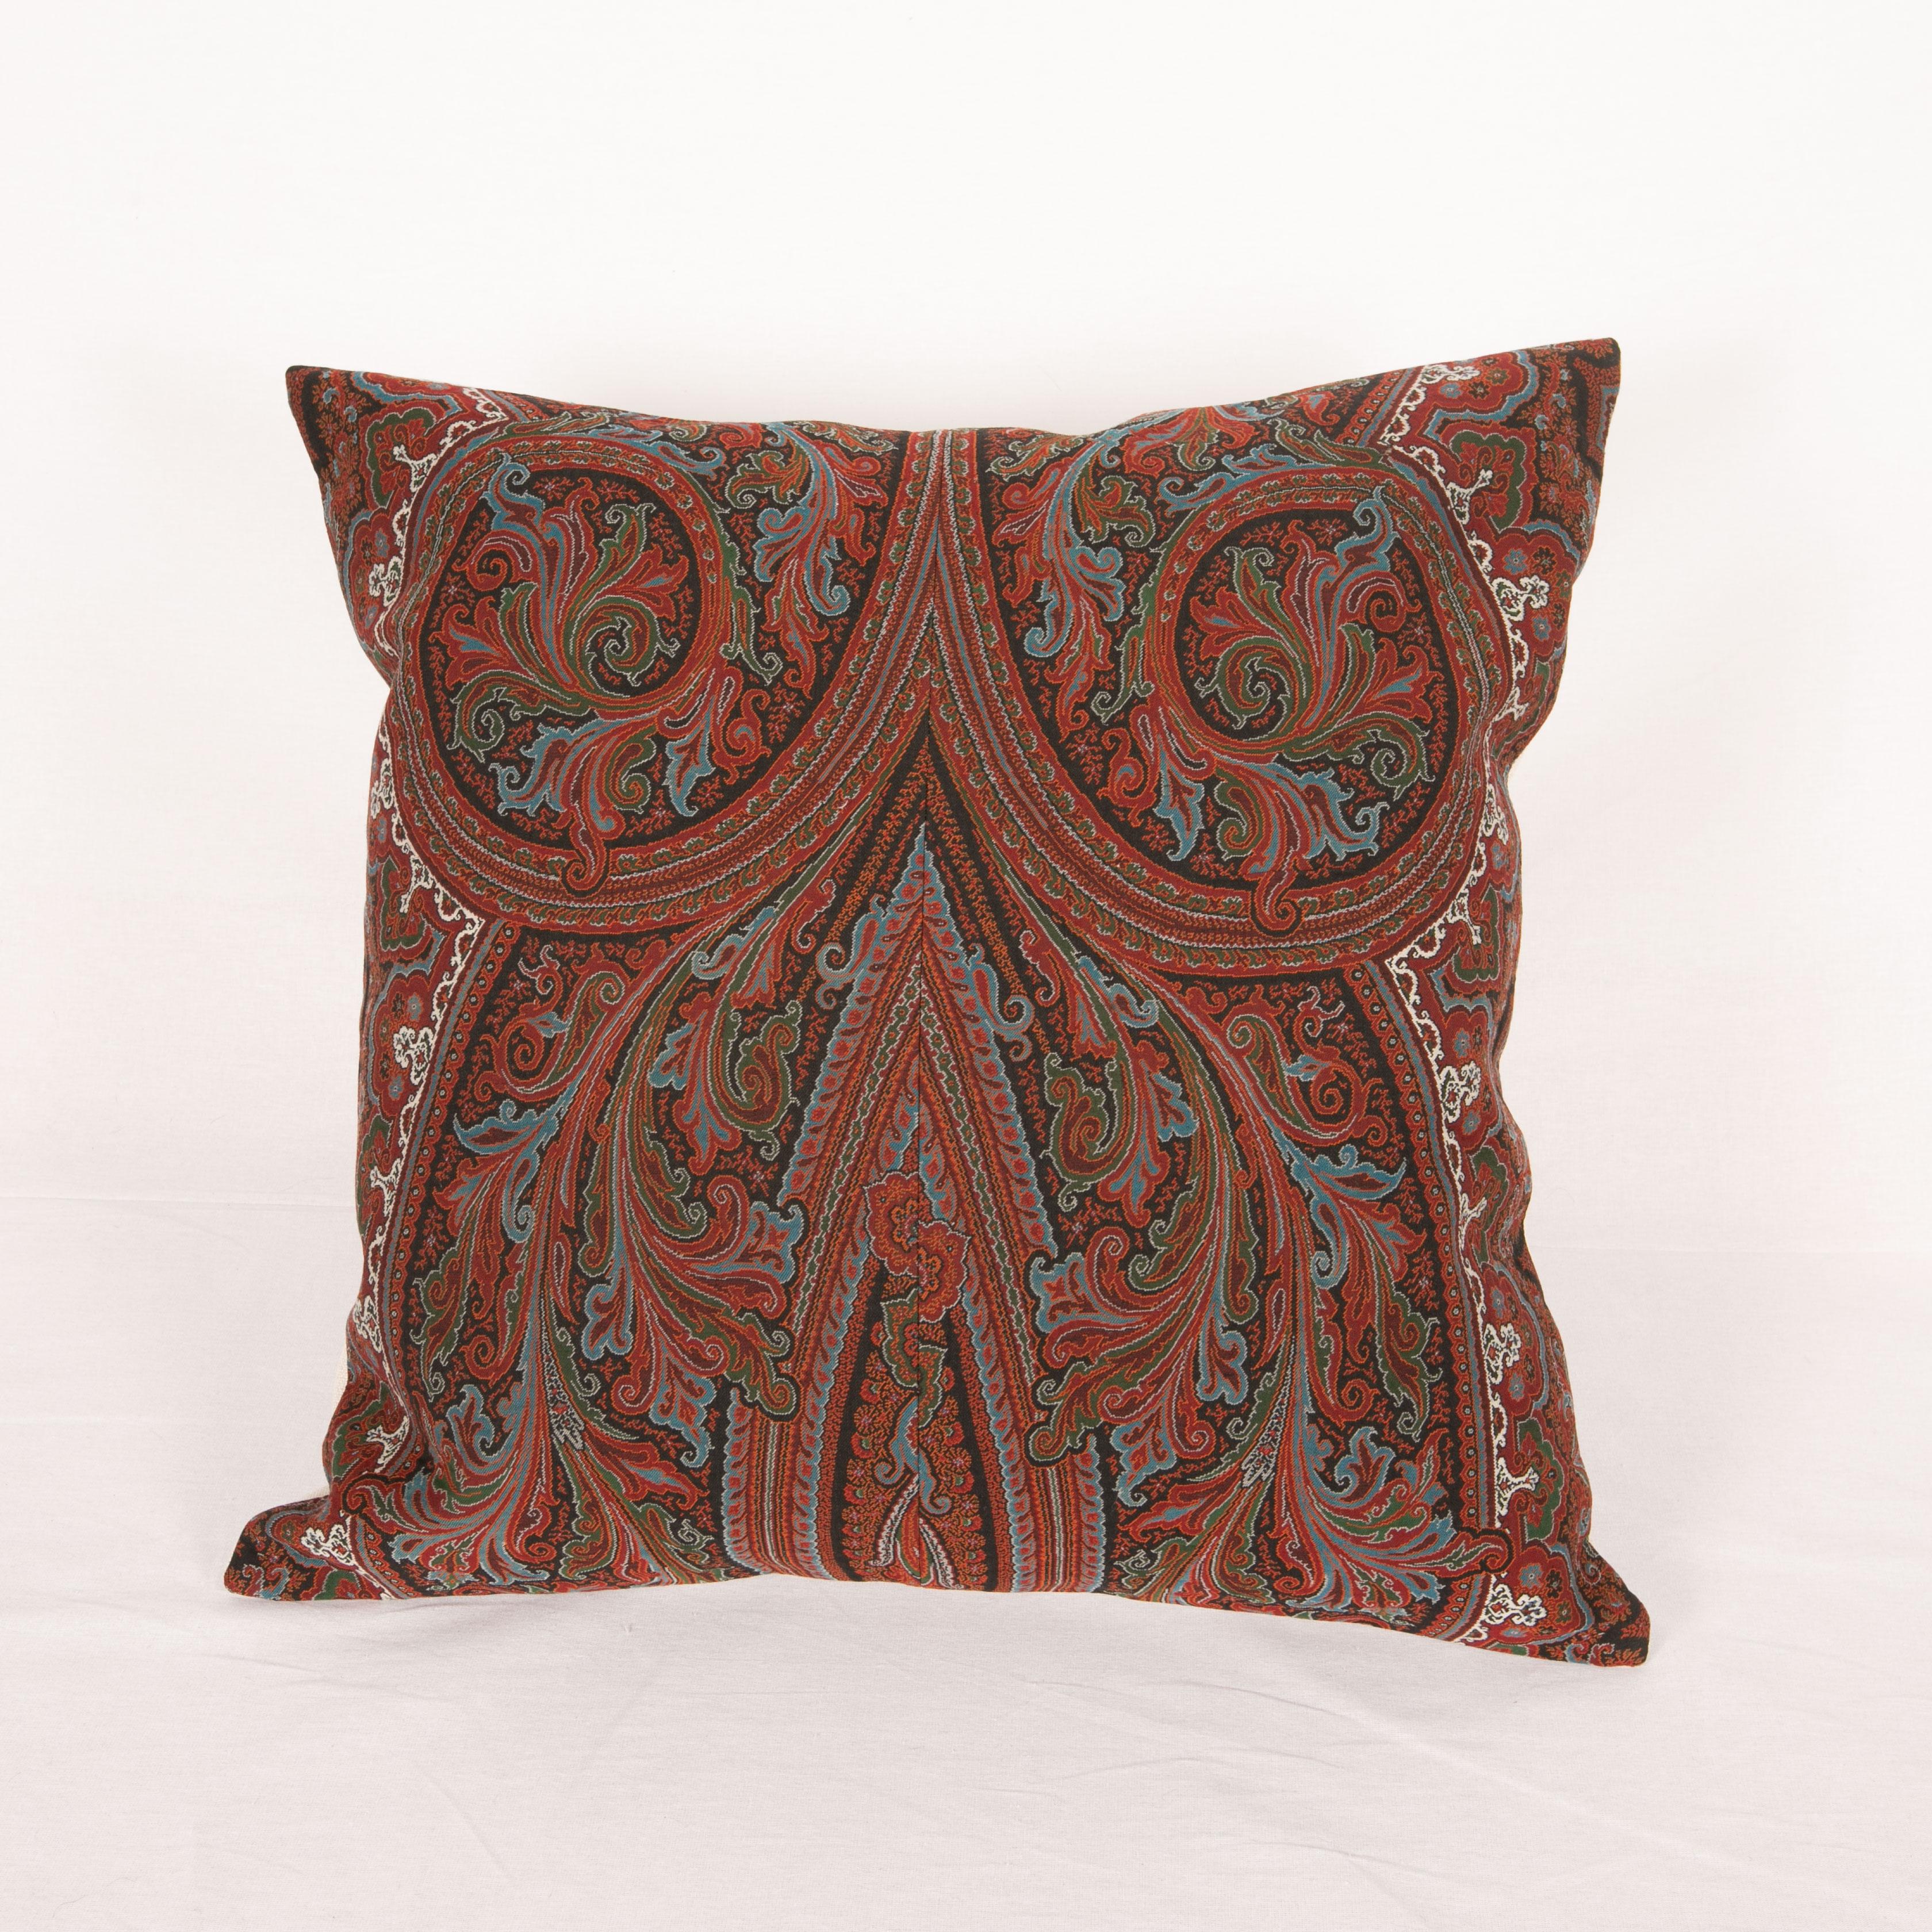 French Antique Paisley Shawl Pillow, 19th C.